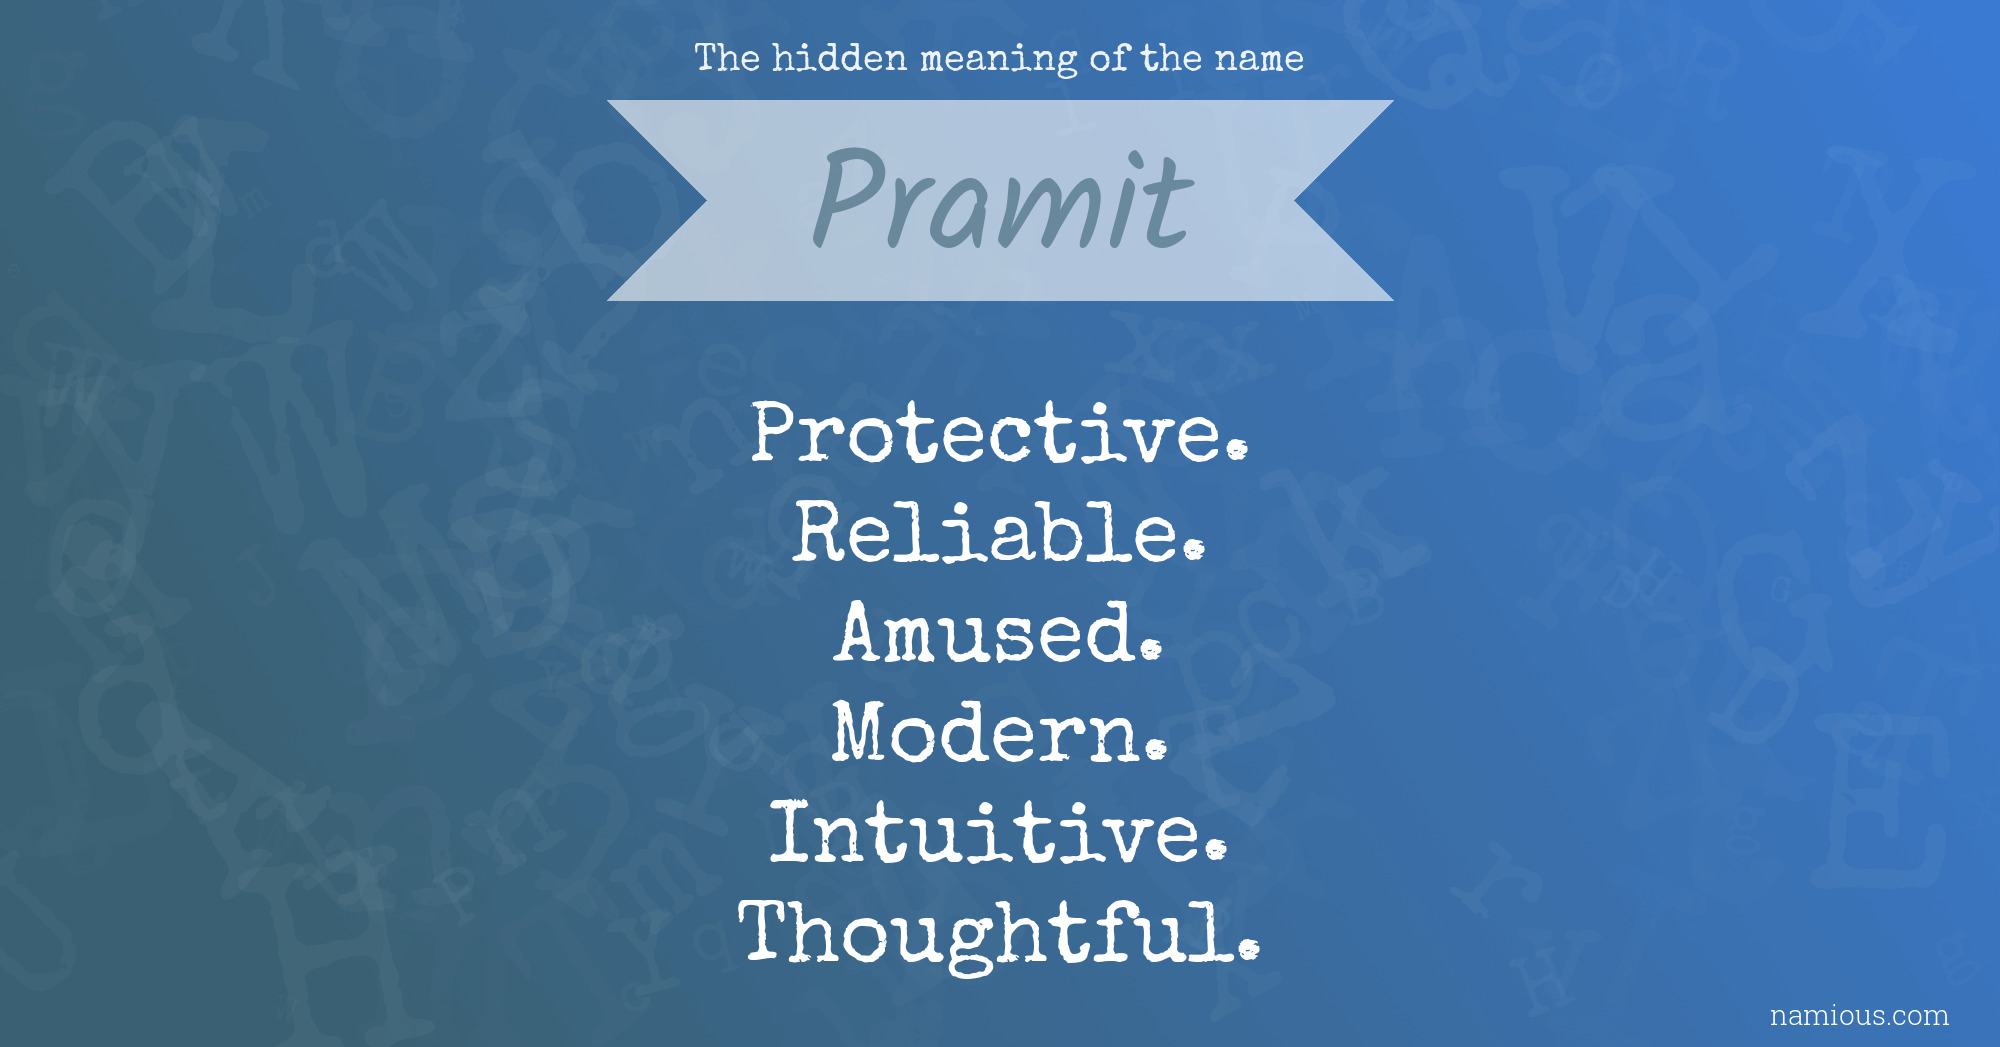 The hidden meaning of the name Pramit